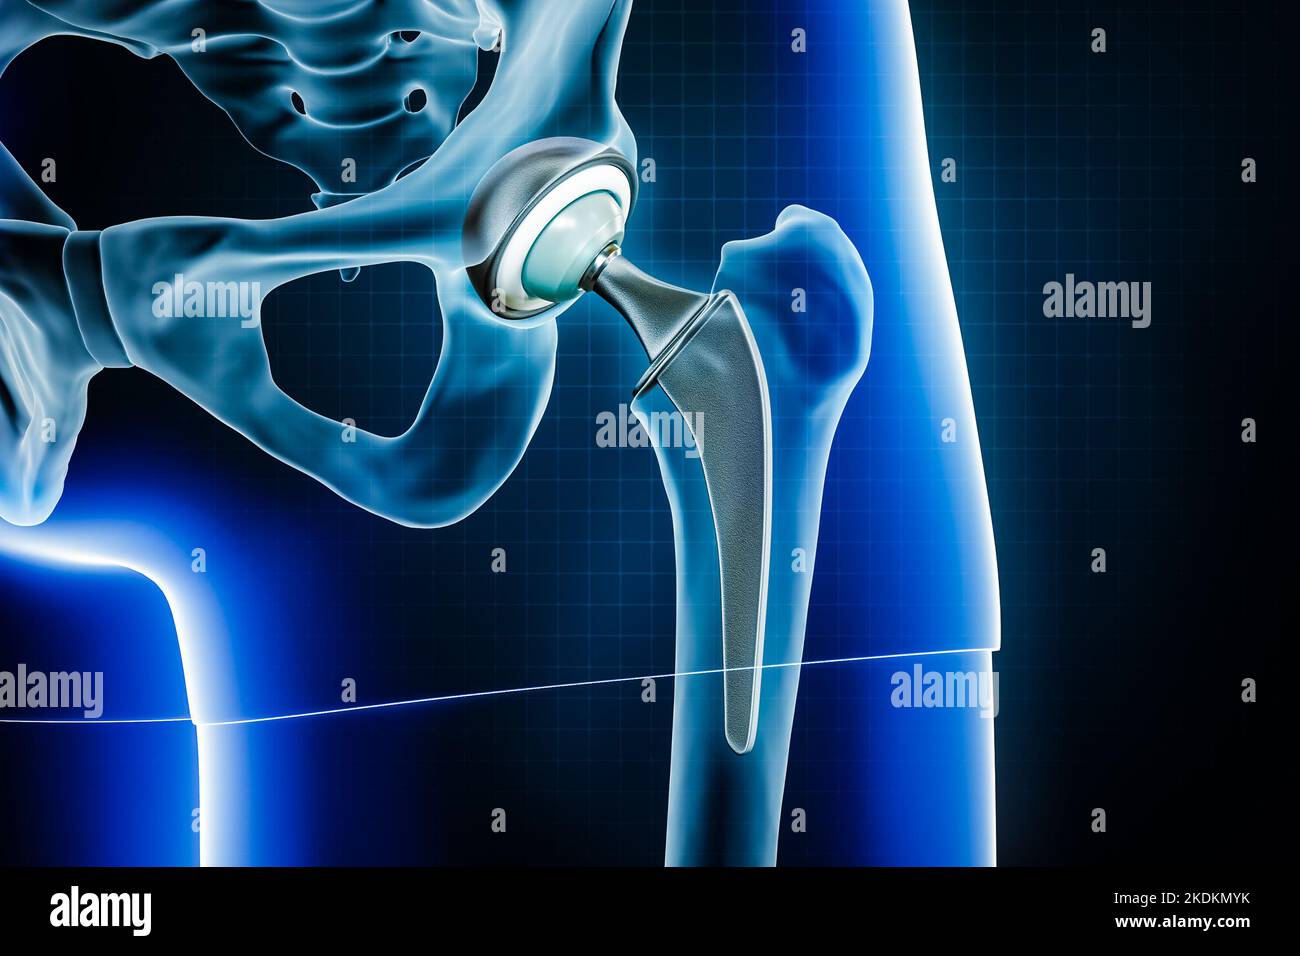 Femoral head hip prosthesis or implant. Total hip joint replacement surgery or arthroplasty 3D rendering illustration. Medical and healthcare, arthrit Stock Photo